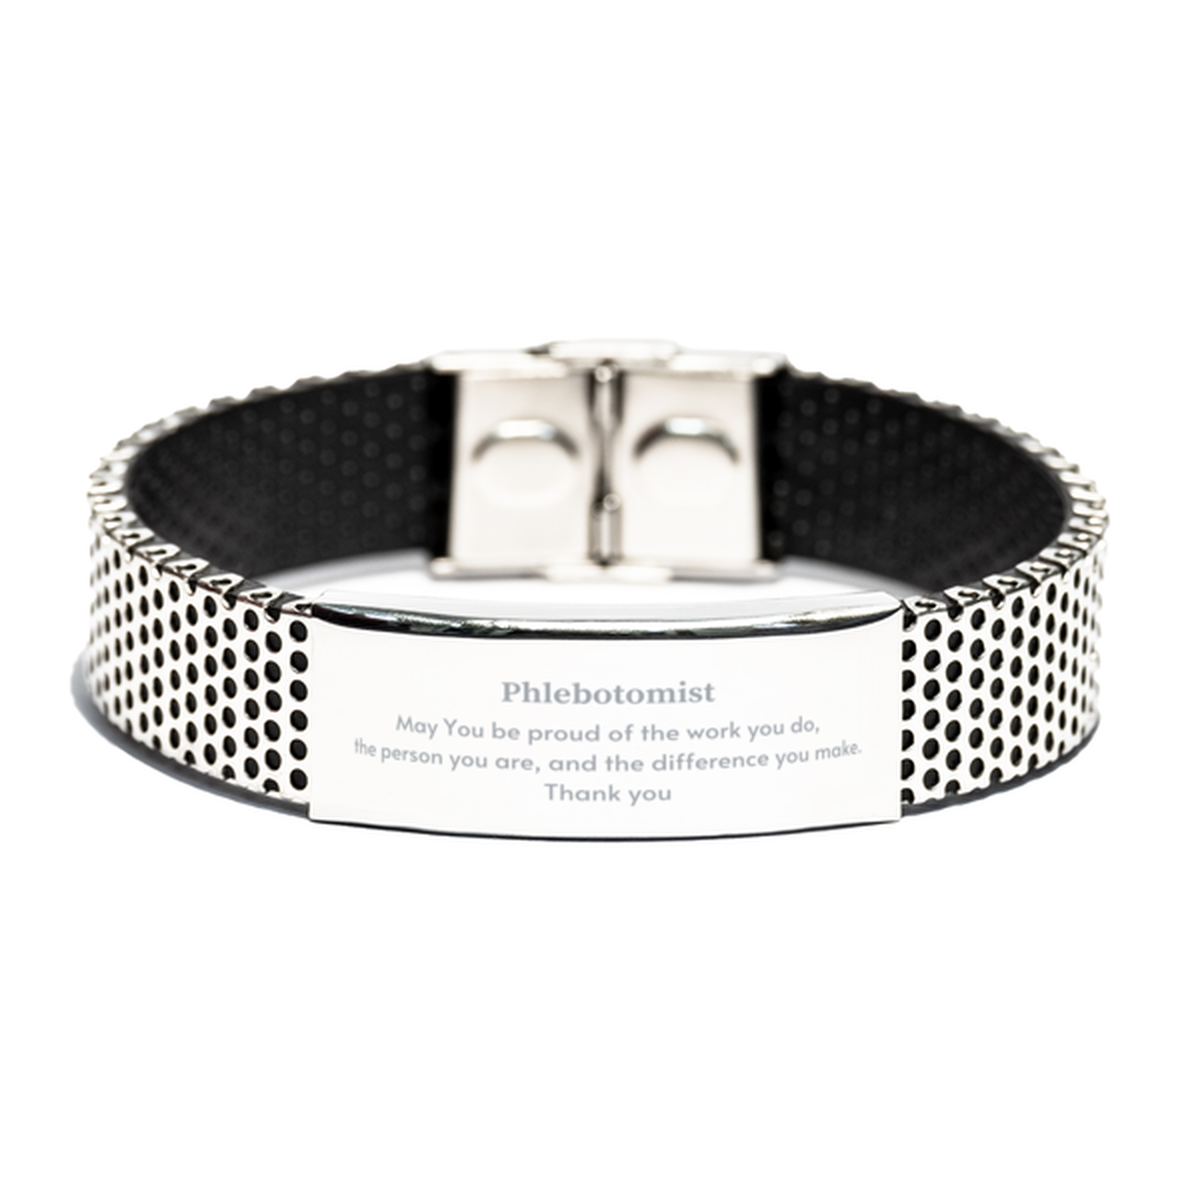 Heartwarming Stainless Steel Bracelet Retirement Coworkers Gifts for Phlebotomist, Phlebotomist May You be proud of the work you do, the person you are Gifts for Boss Men Women Friends